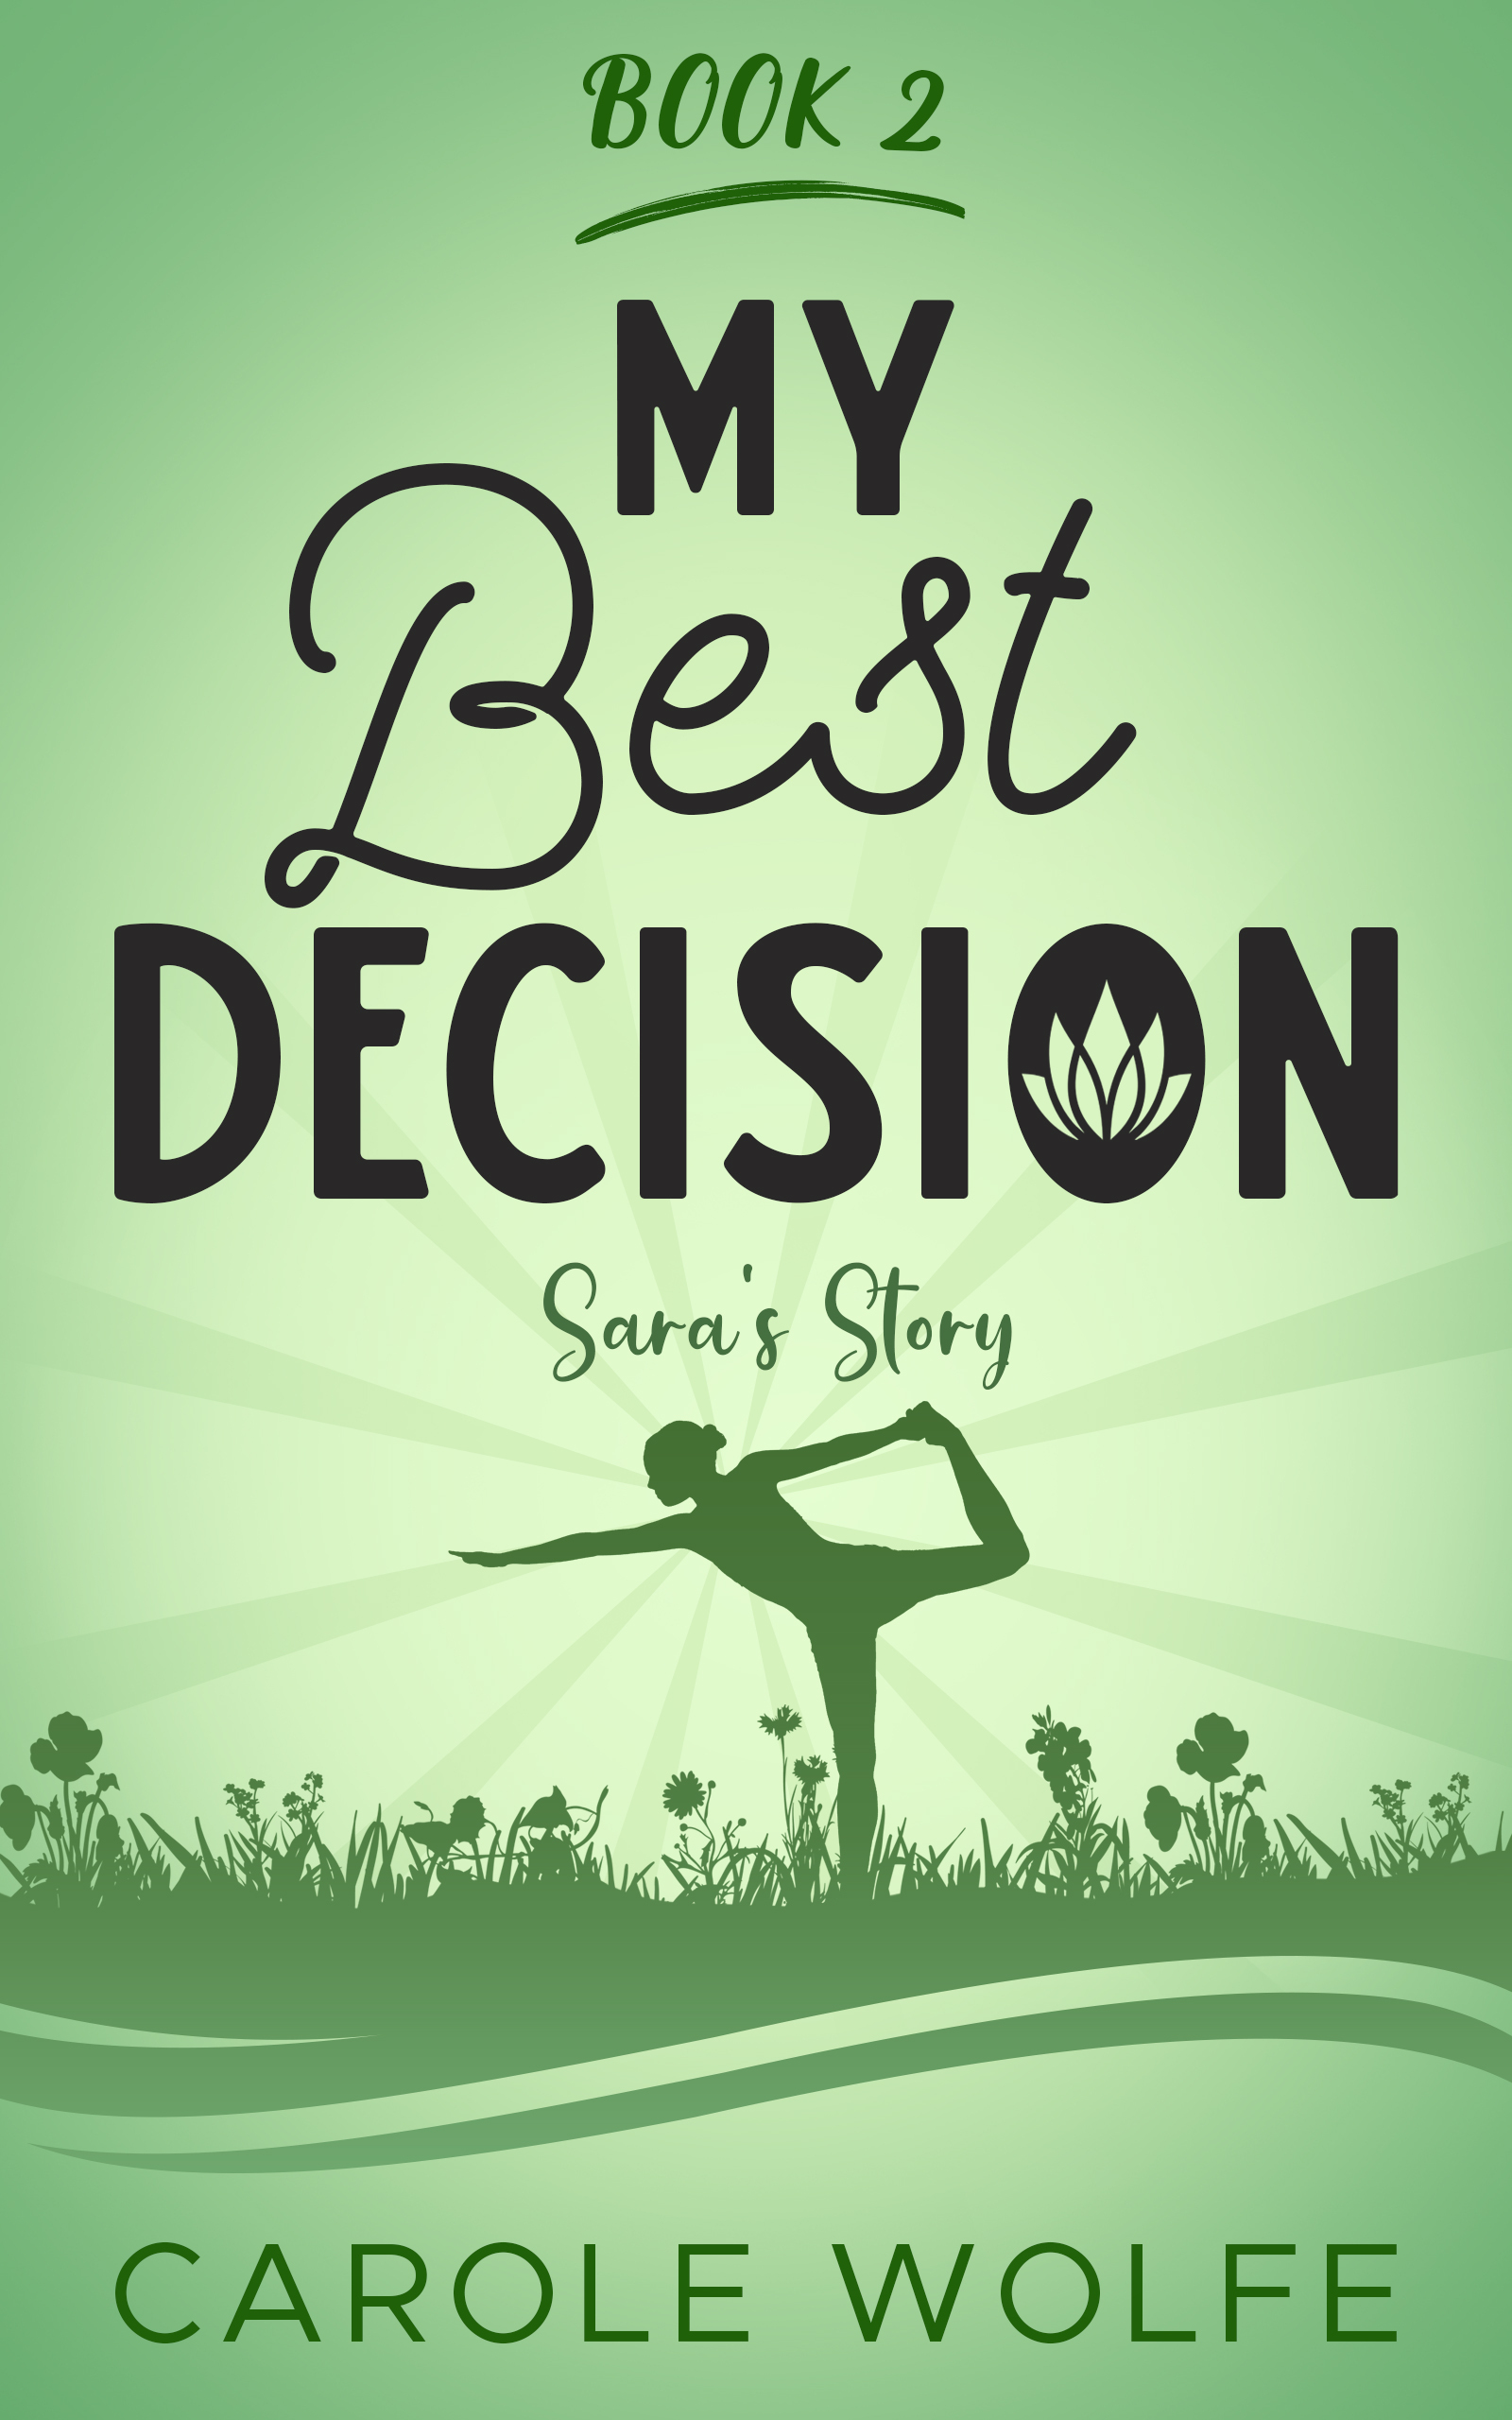 Cover of My Best Decision - Sara's Story. Book 2 in the My Best Series.